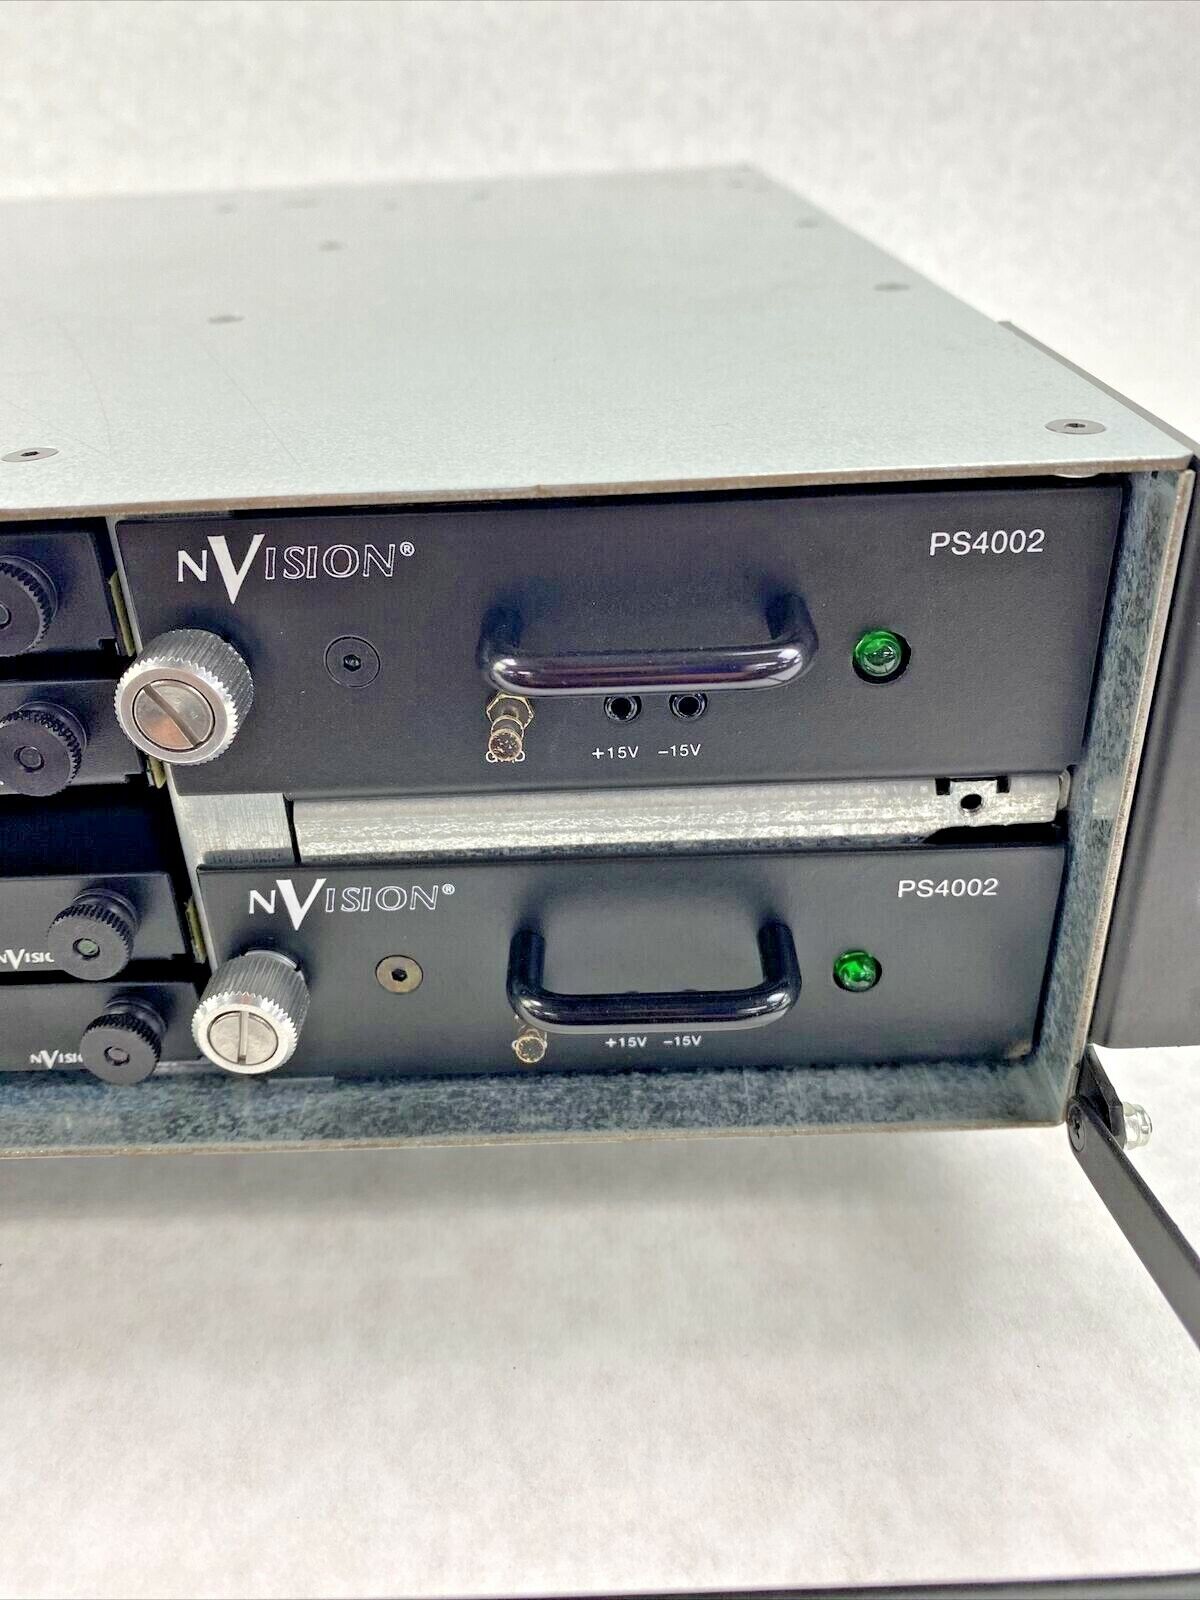 NVision 1 NV4002 case + 2 PS4002 power supplies + 8 DA4010 AES Fanout boards